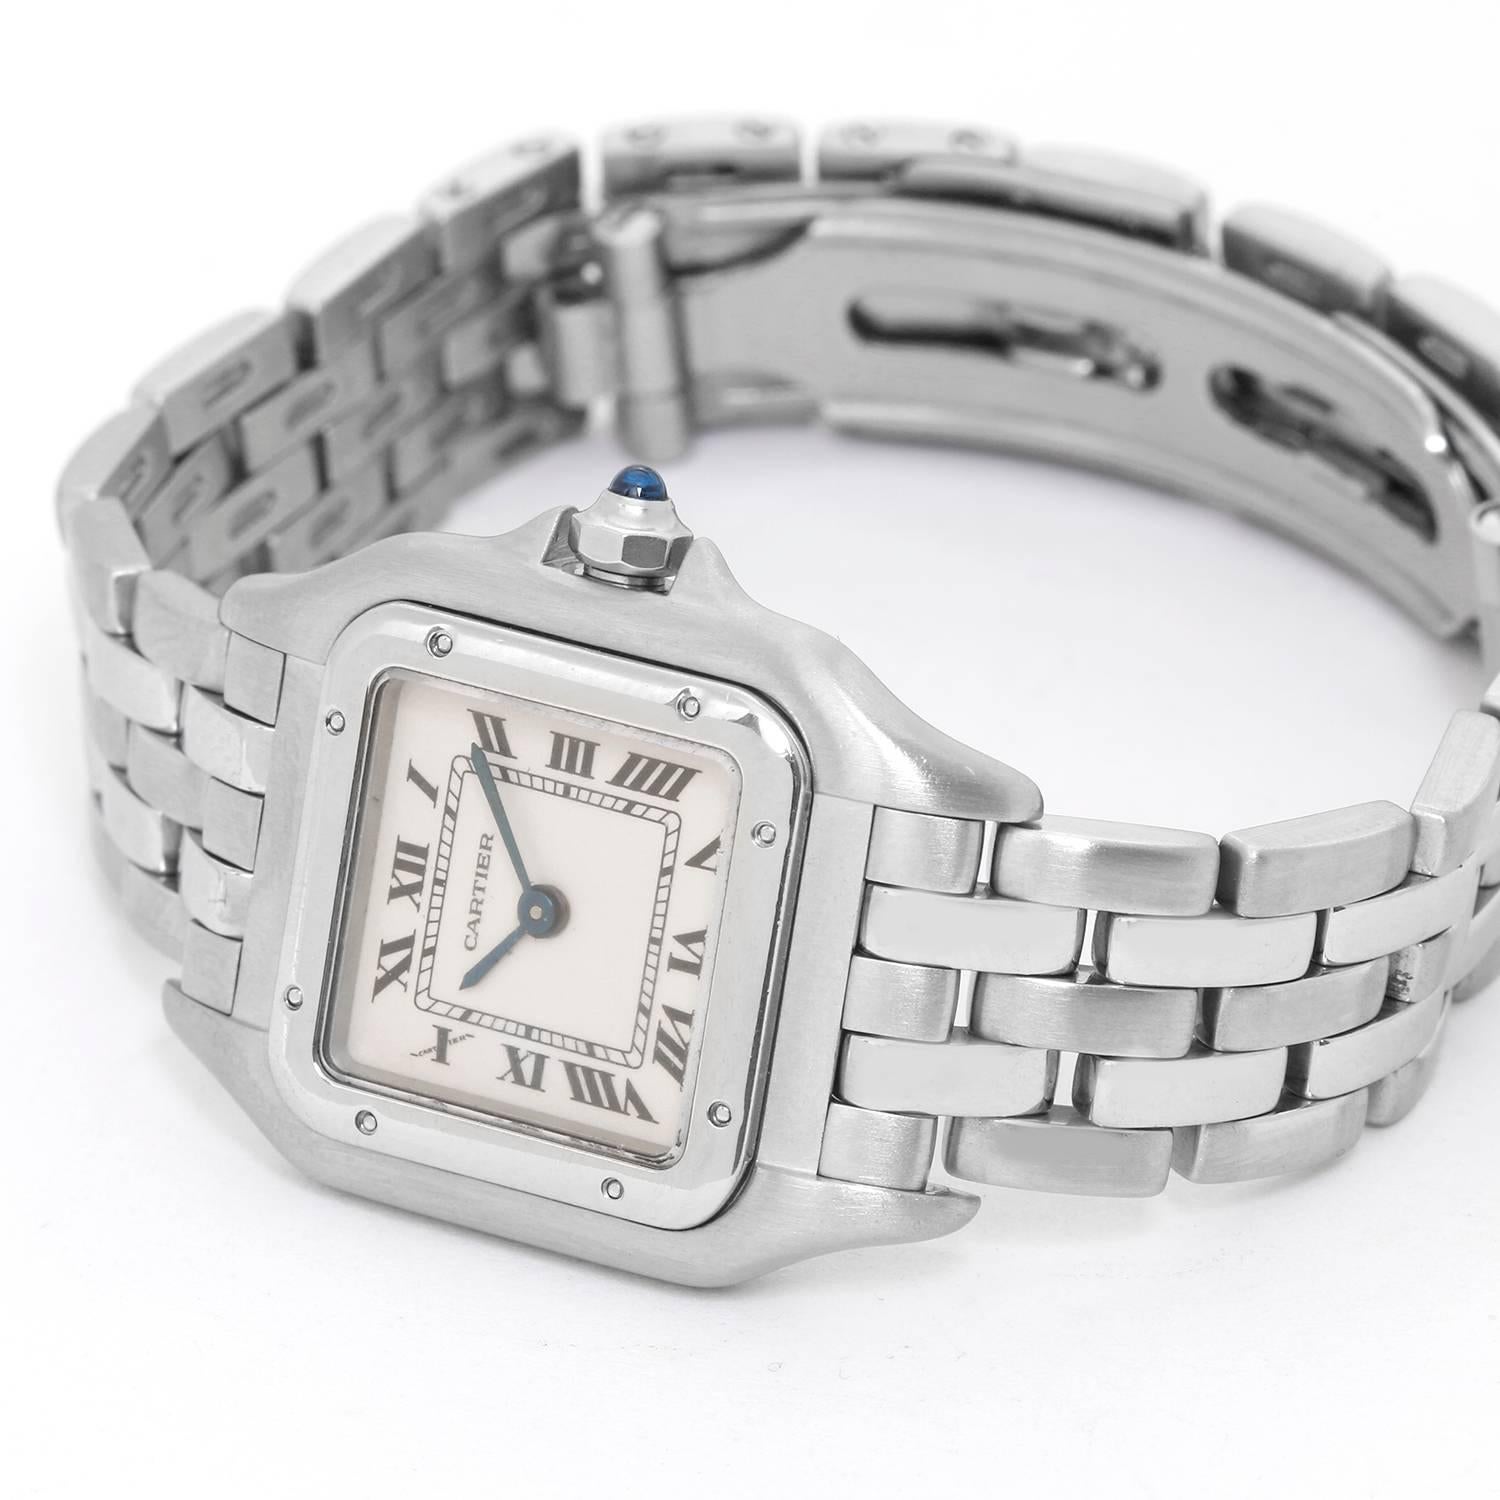 Cartier Panther Ladies Stainless Steel Panthere Watch W25033P5 -  Quartz. Stainless steel case (21mm x 30mm). Ivory colored dial with black Roman numerals. Stainless steel Panthere bracelet. Pre-owned with custom box.